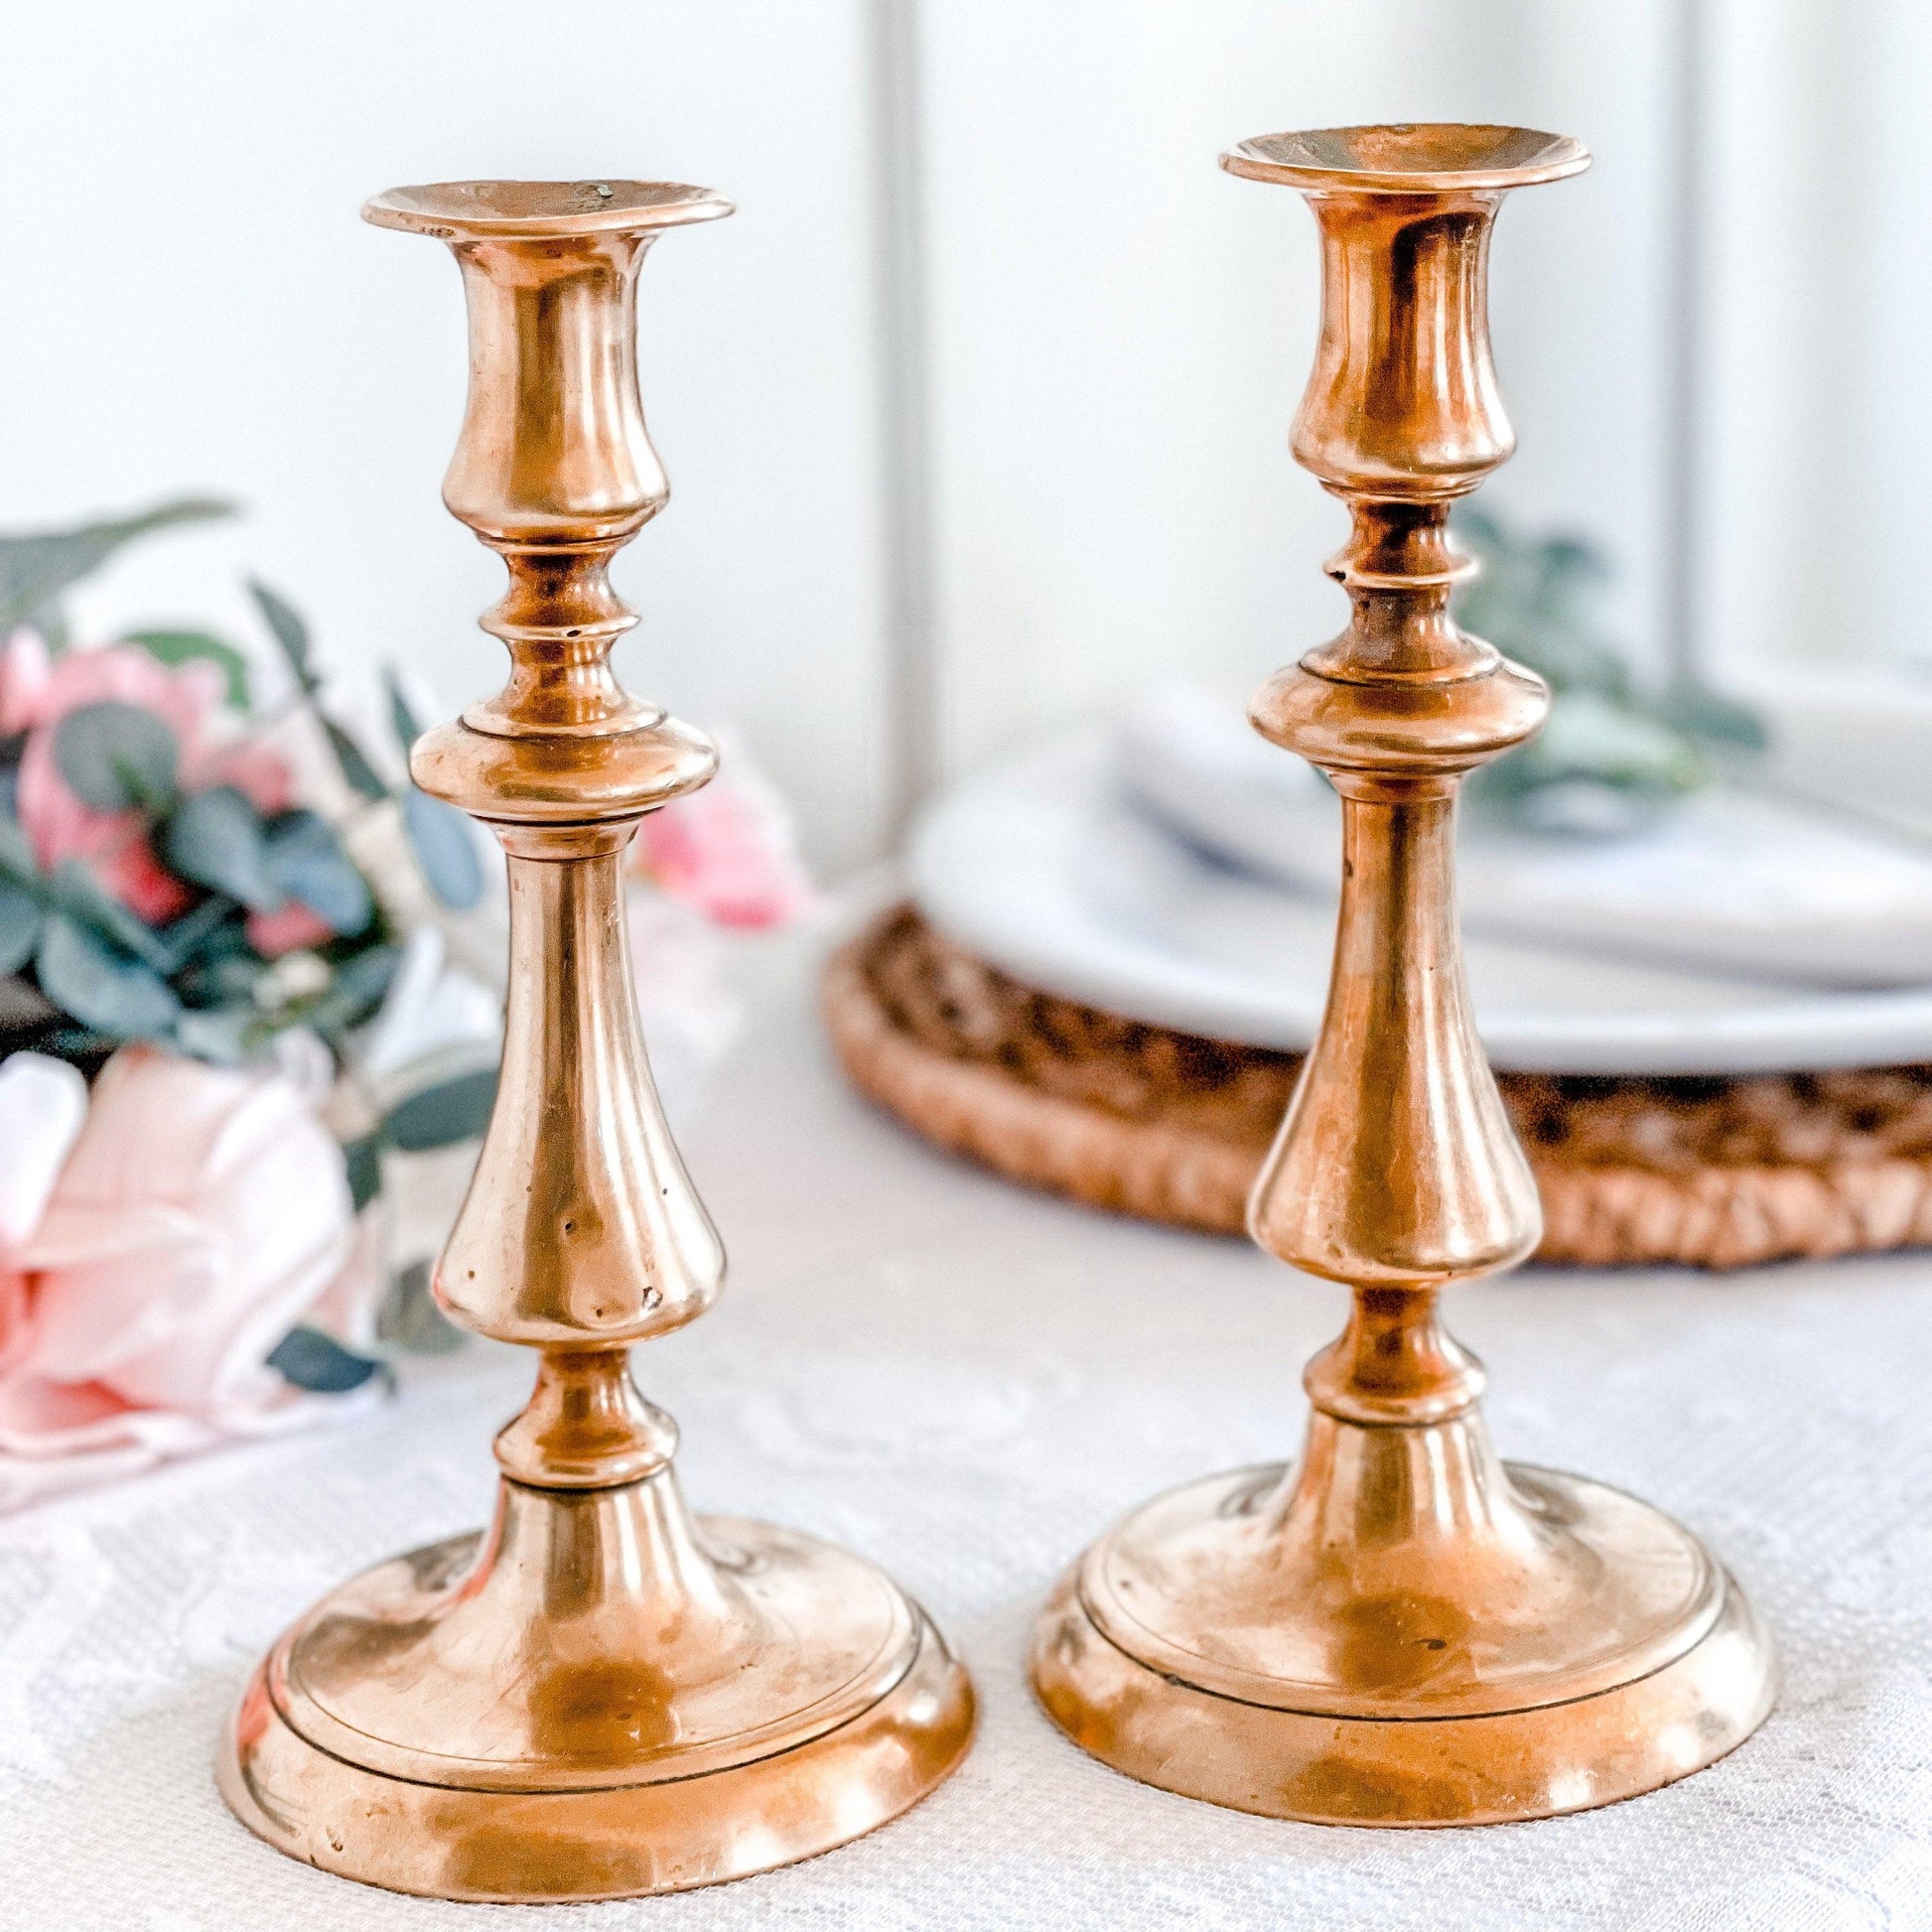 Vintage Brass Candle Holders - RetroWix 